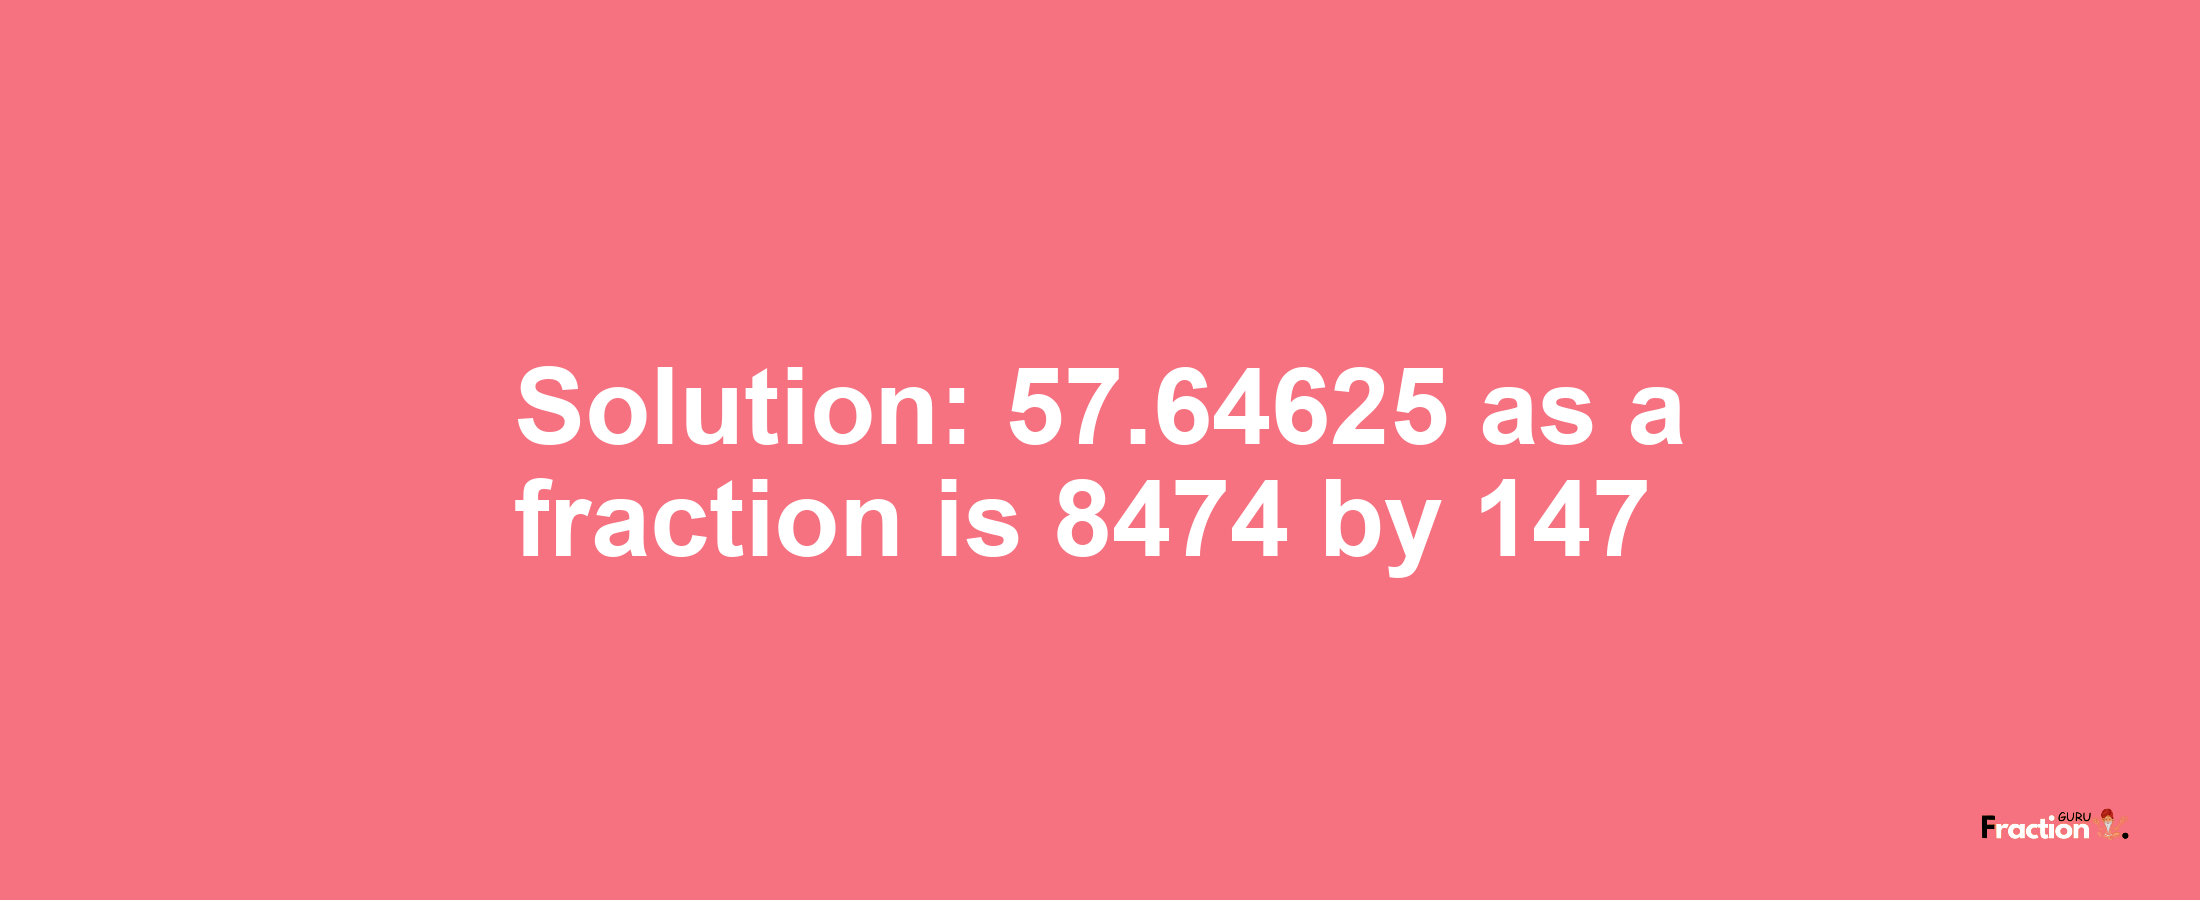 Solution:57.64625 as a fraction is 8474/147